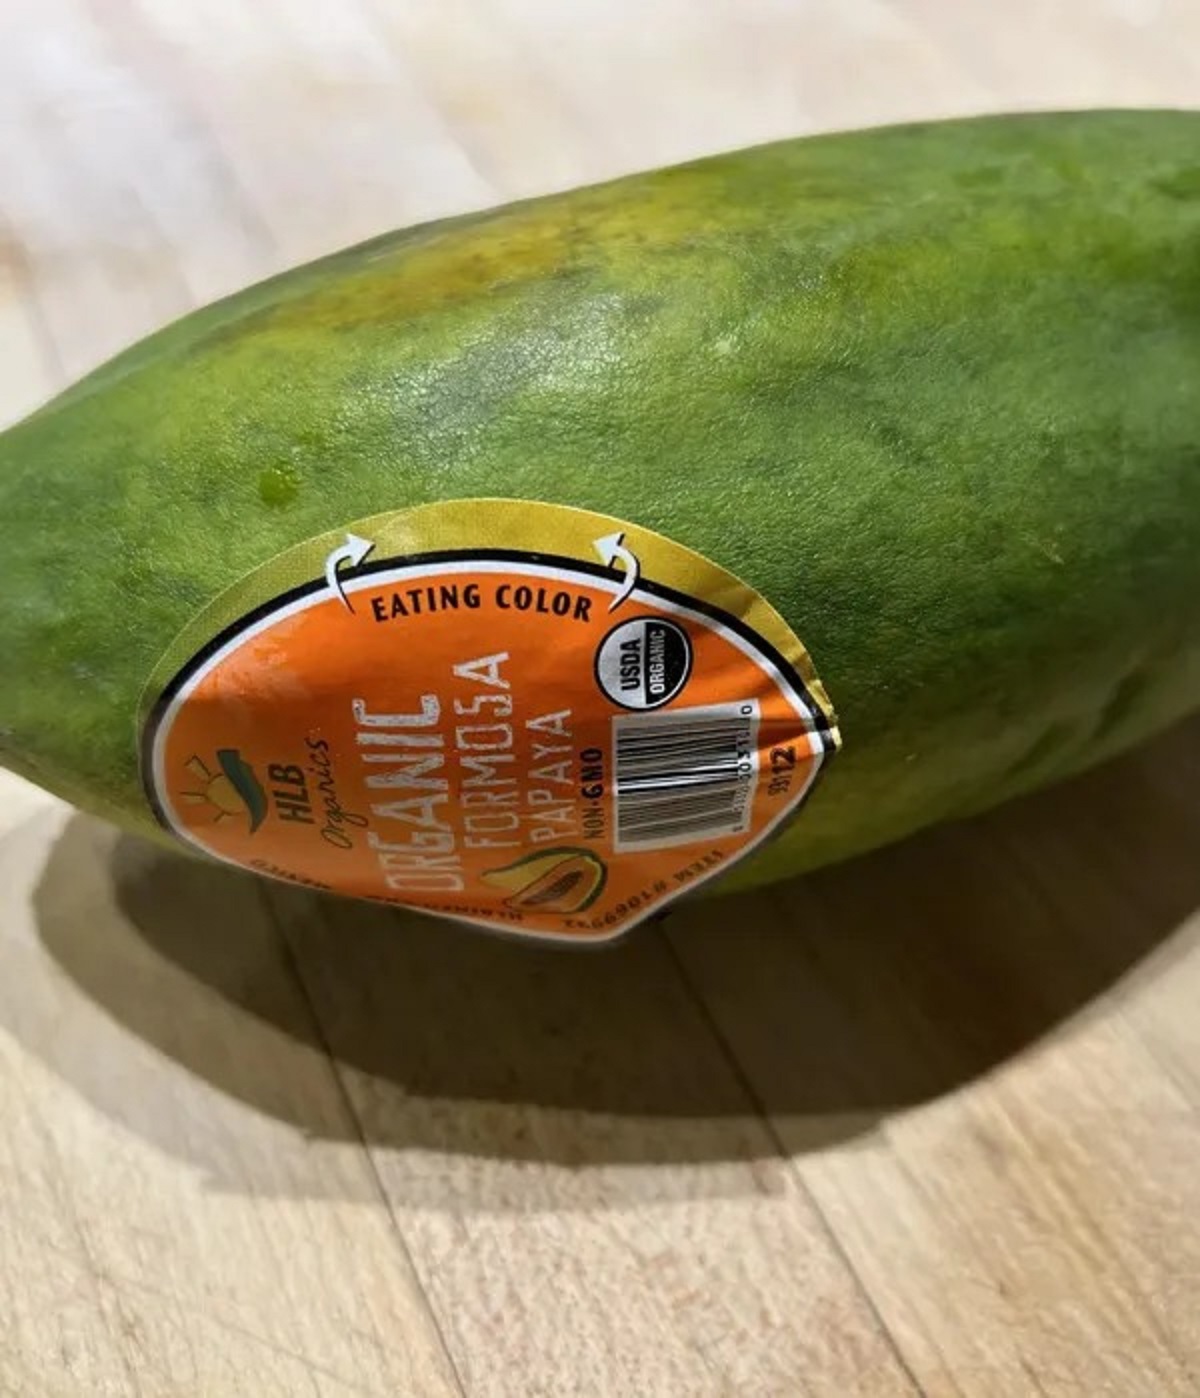 This papaya has an “eating color” sticker to let you know when it’s ripe